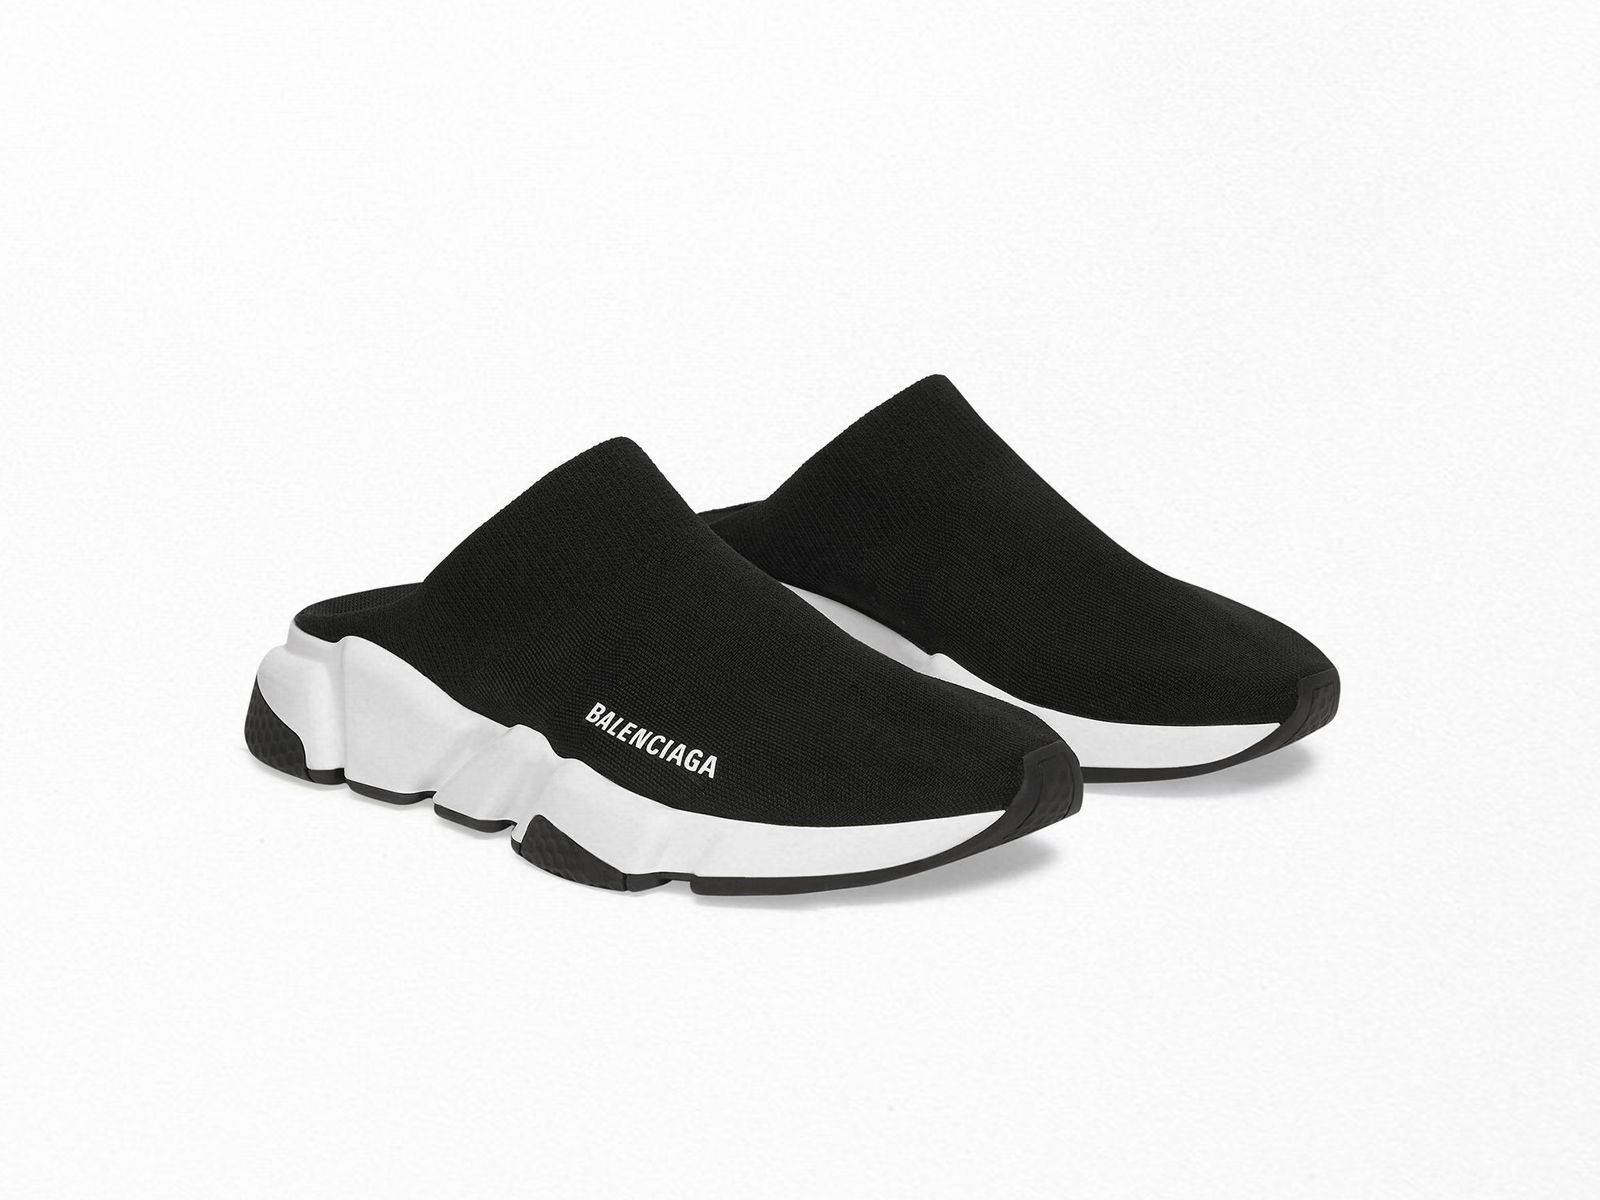 Balenciaga’s Speed Trainers return this season in the form of mules